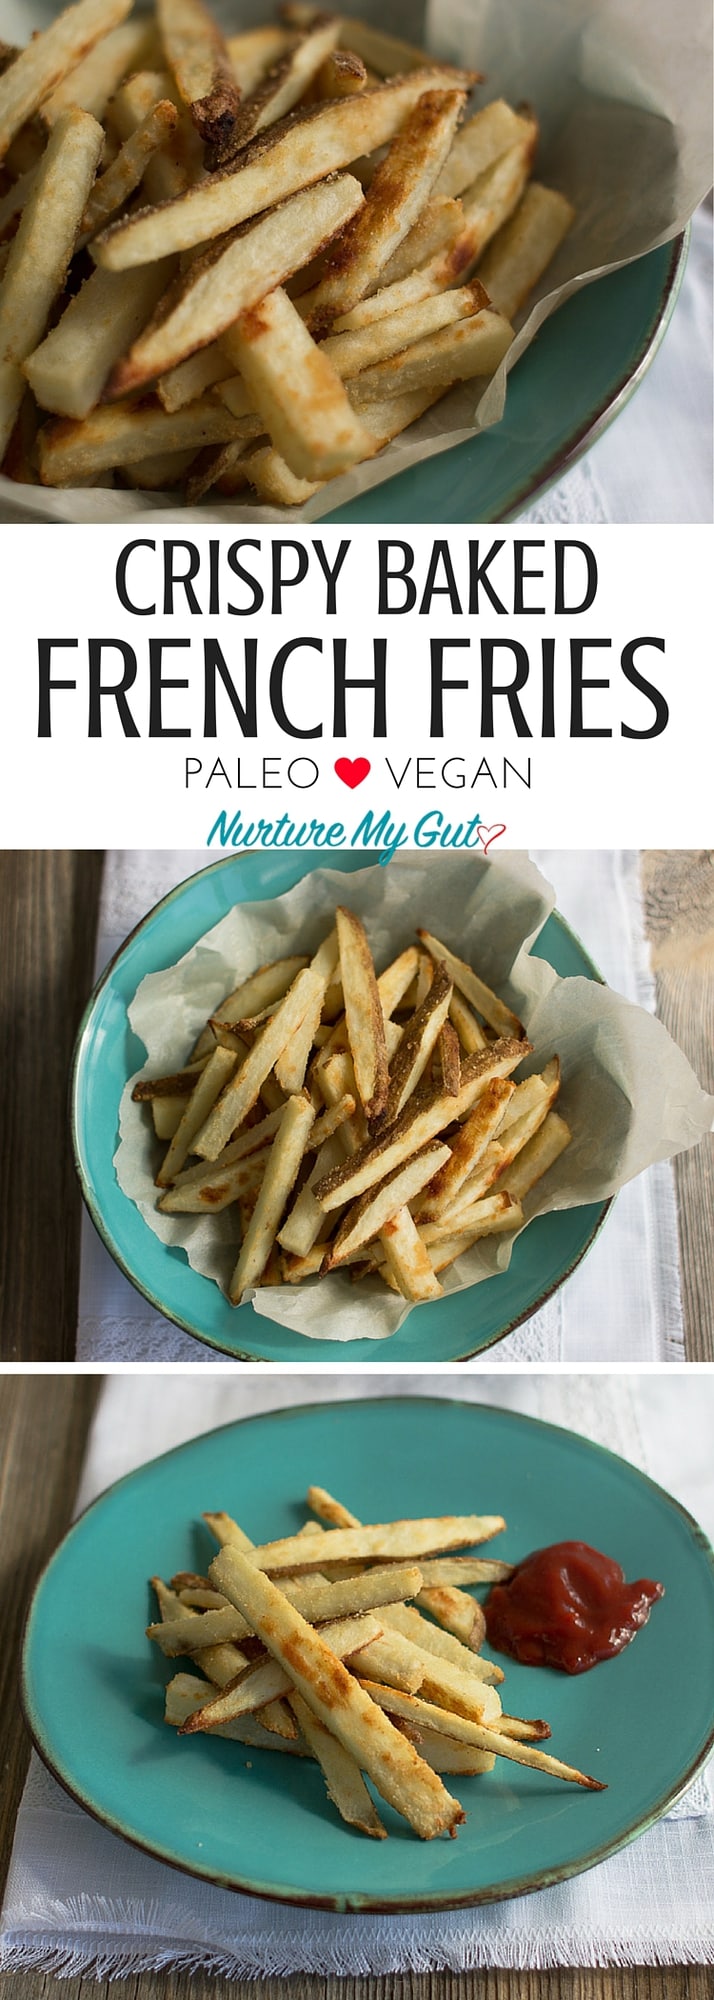 CRISPY BAKED FRENCH-FRIES